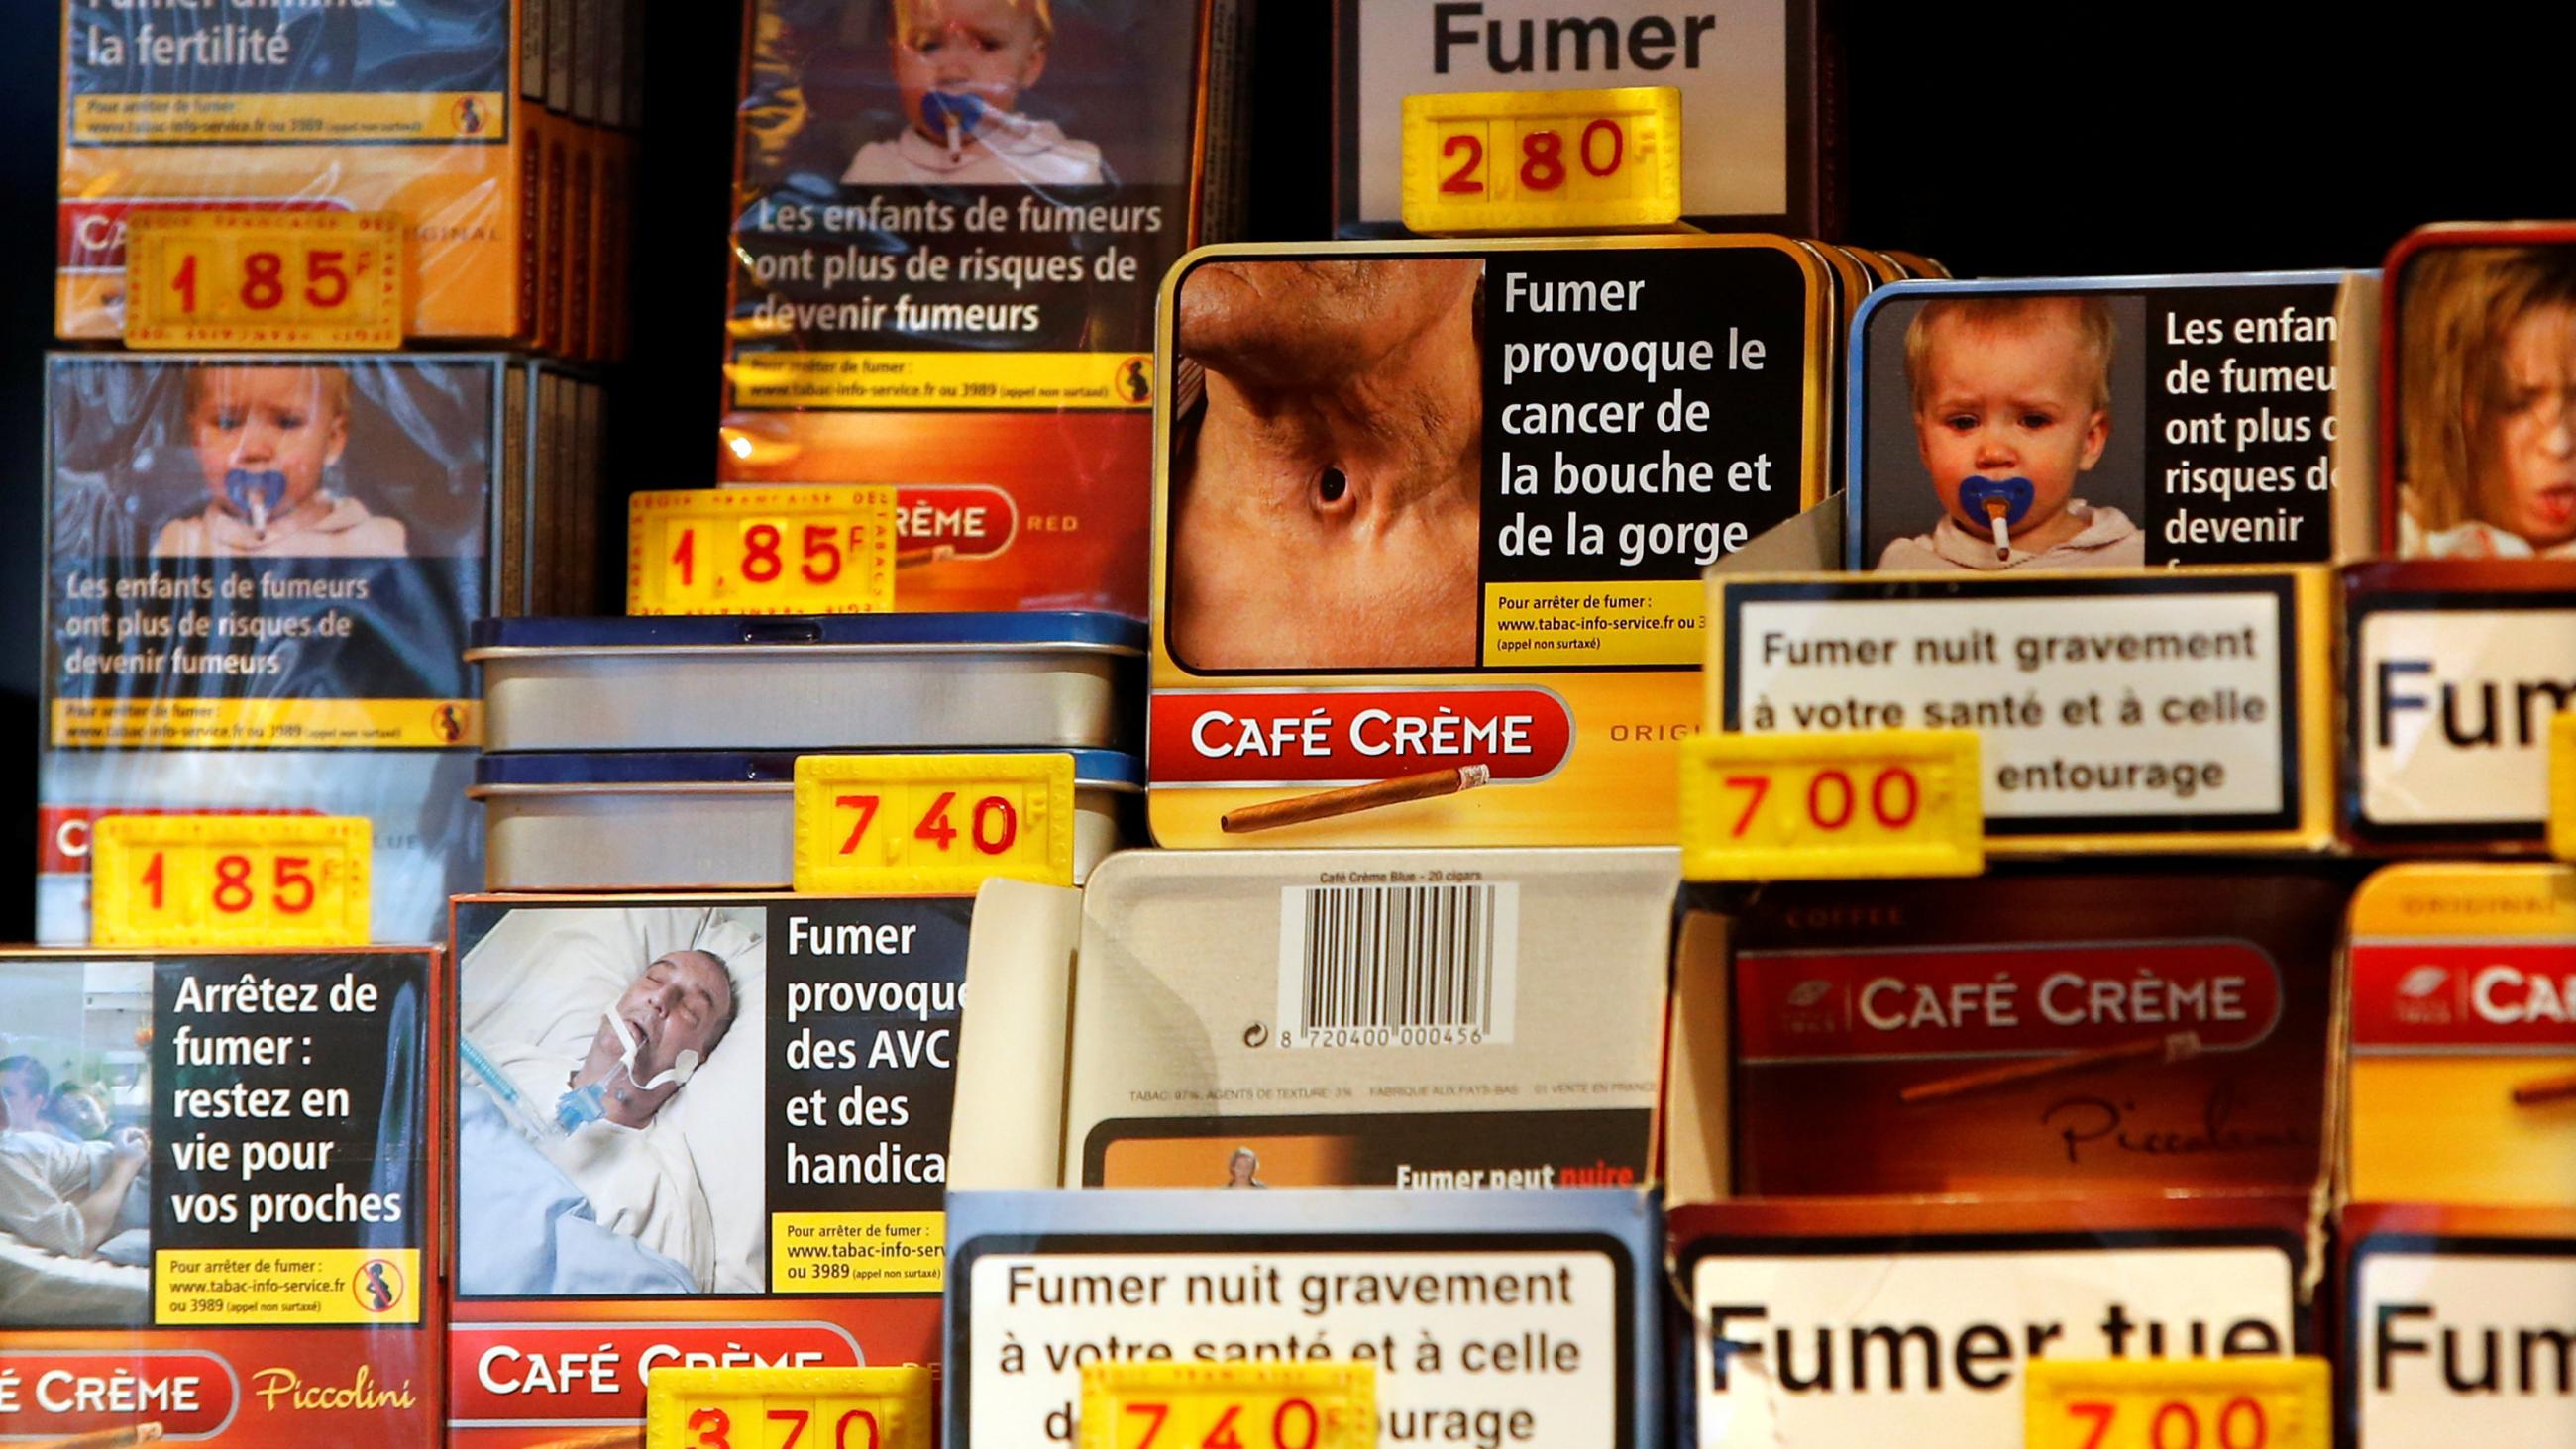 The image shows a tobacco store shelf with a variety of boxes all adorned with graphic warming labels. 